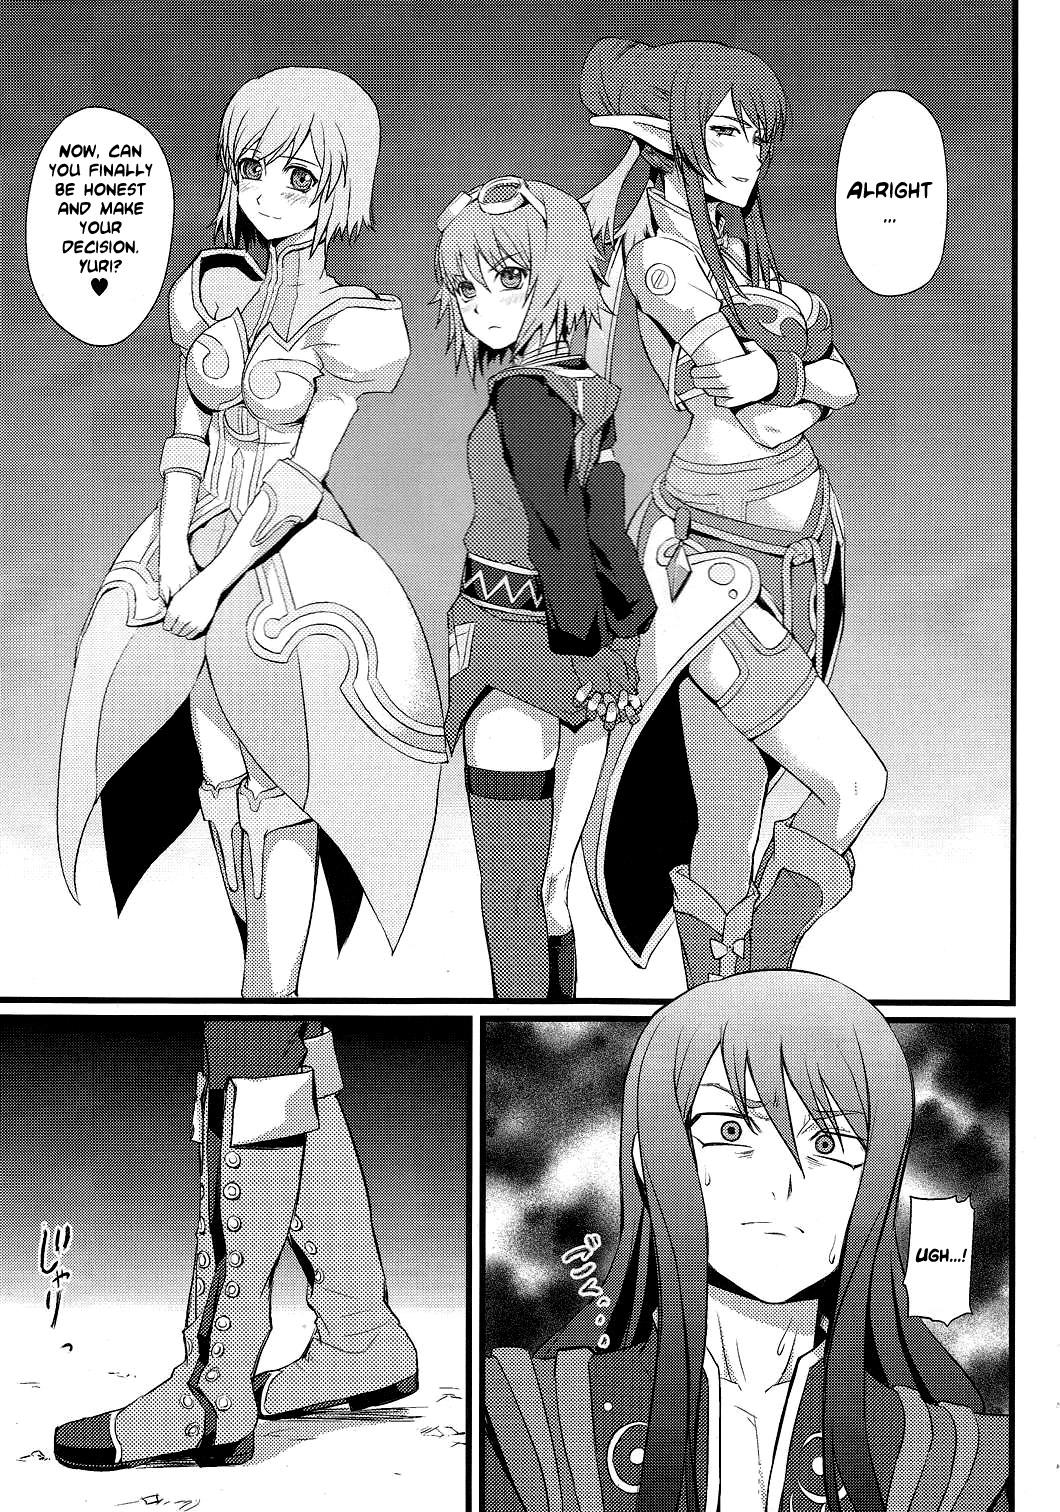 Smalltits Strike! Army of Beauties - Tales of vesperia Hard Core Sex - Page 4